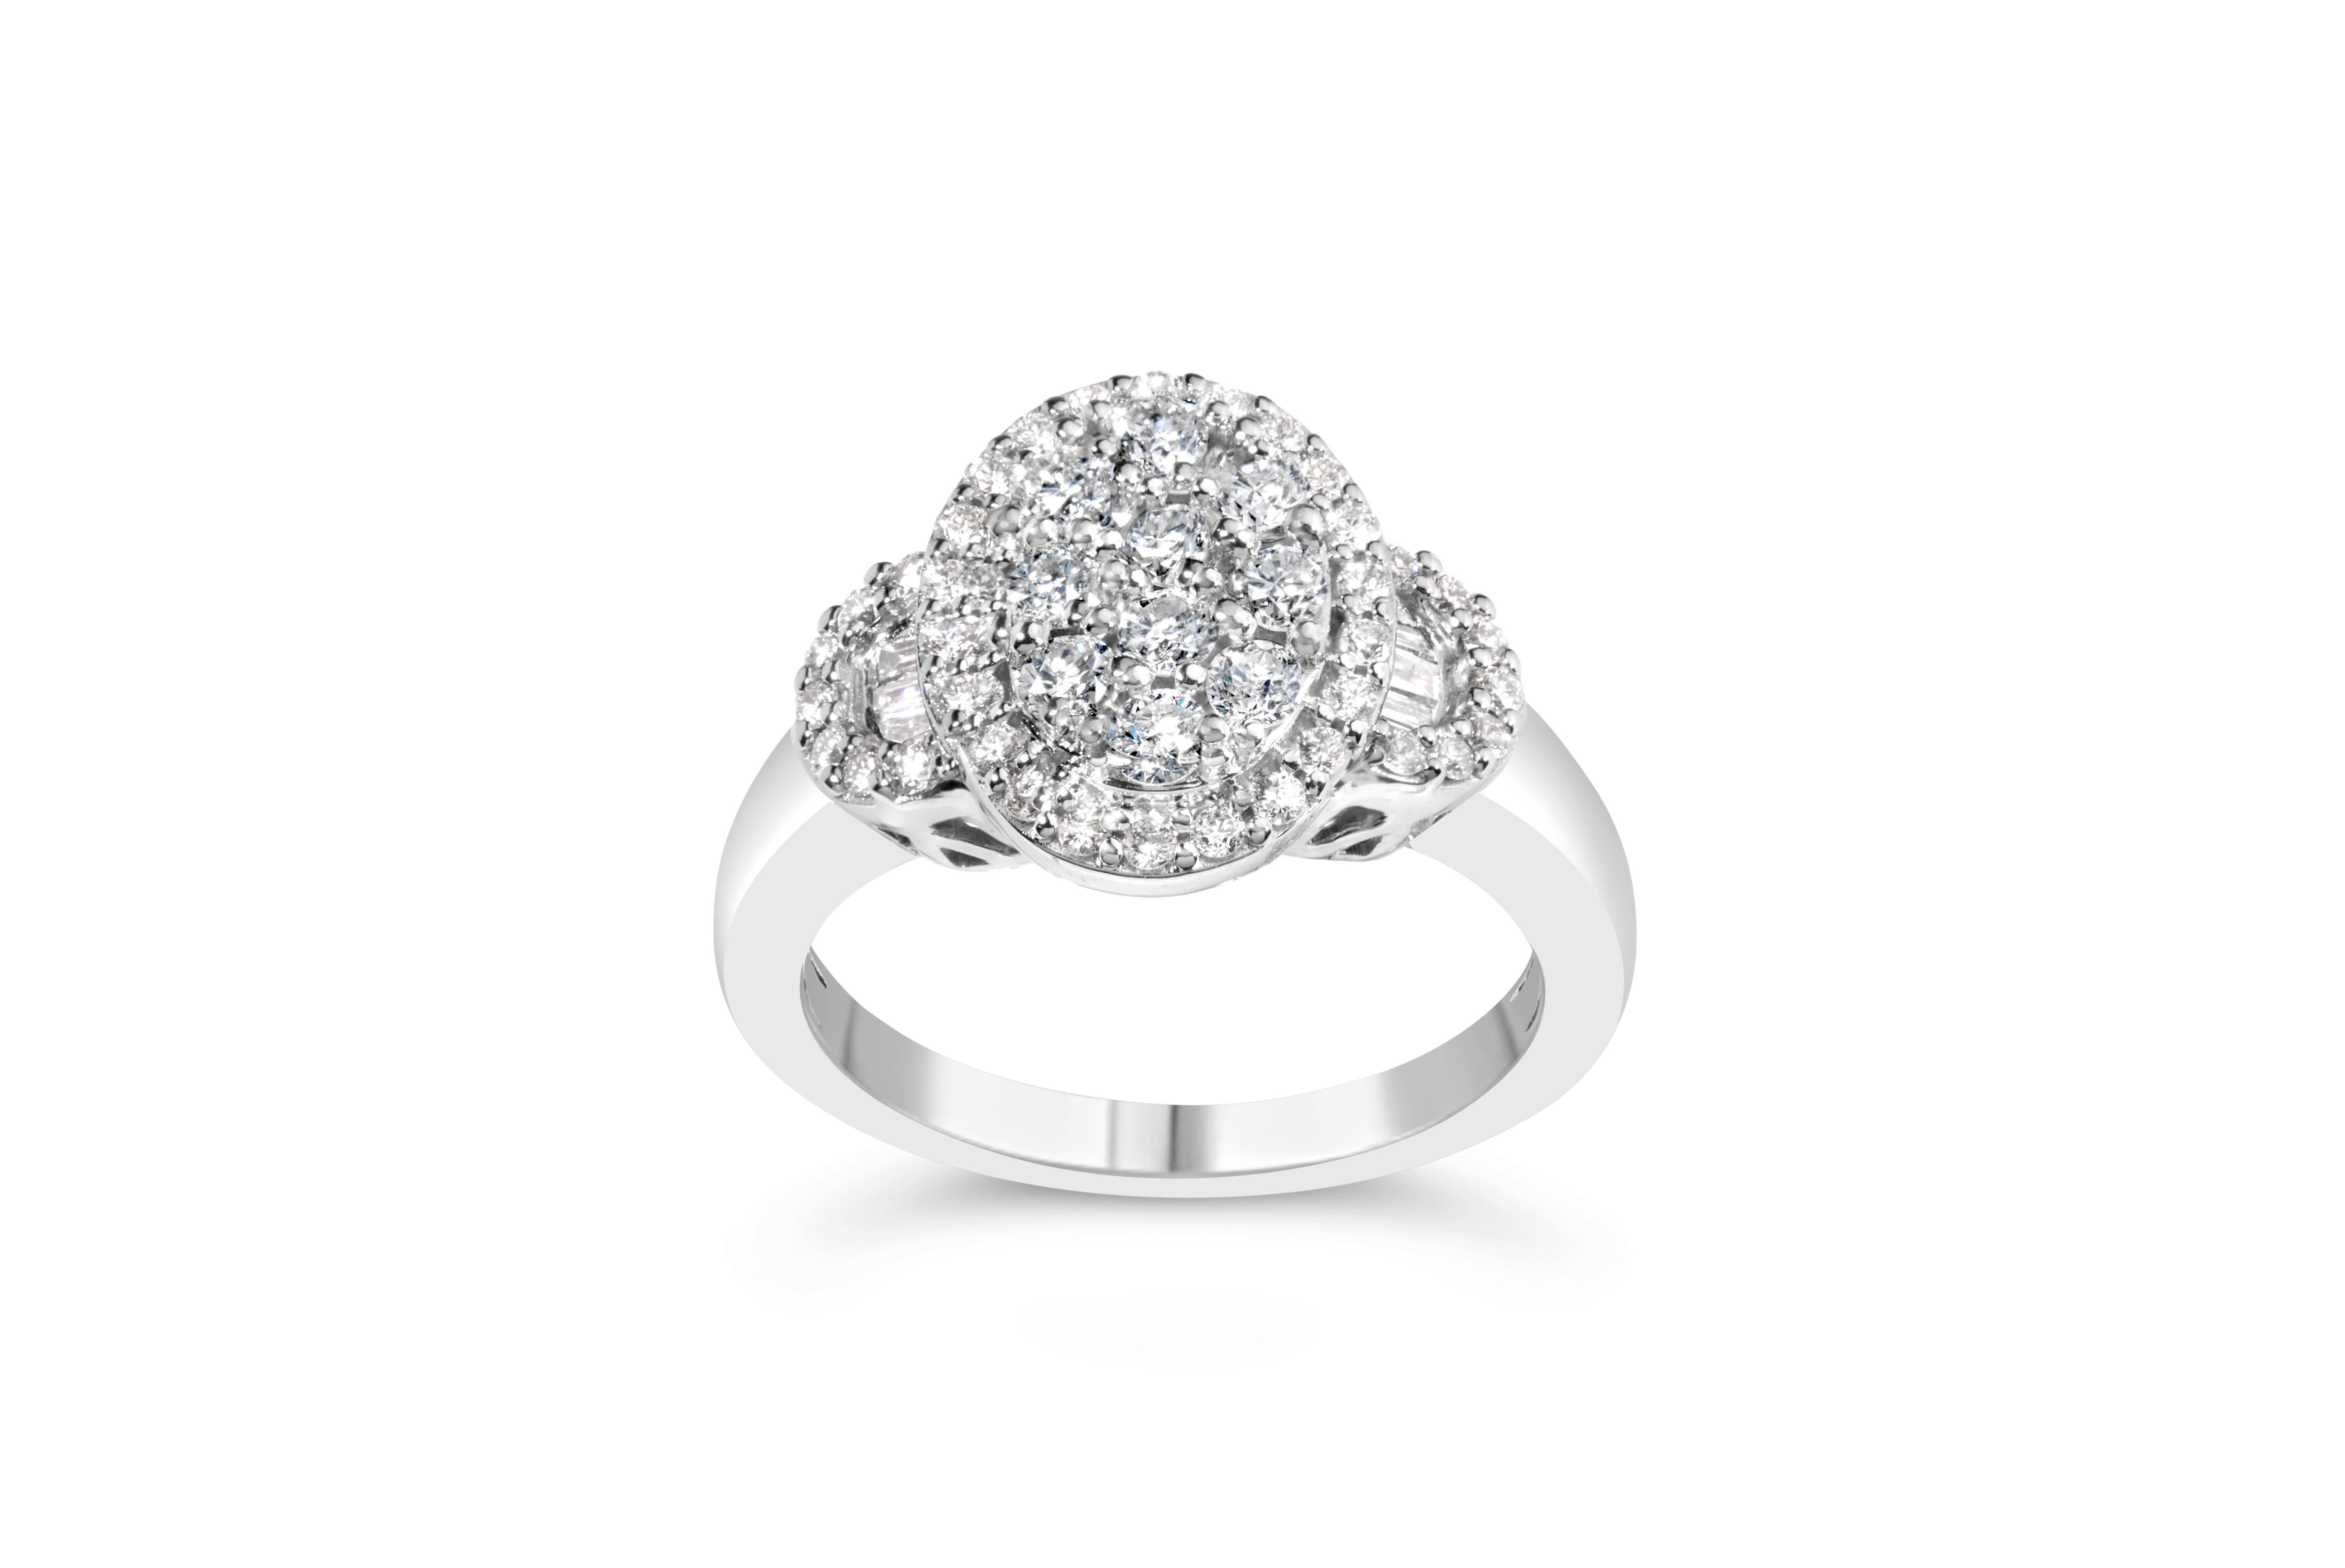 Elegant and timeless, this 10K white gold diamond cocktail ring features 1.0 carat total weight of diamonds with an astonishing 52 individual stones. The fashion ring features an oval shaped cluster inset with round, brilliant cut white diamonds in